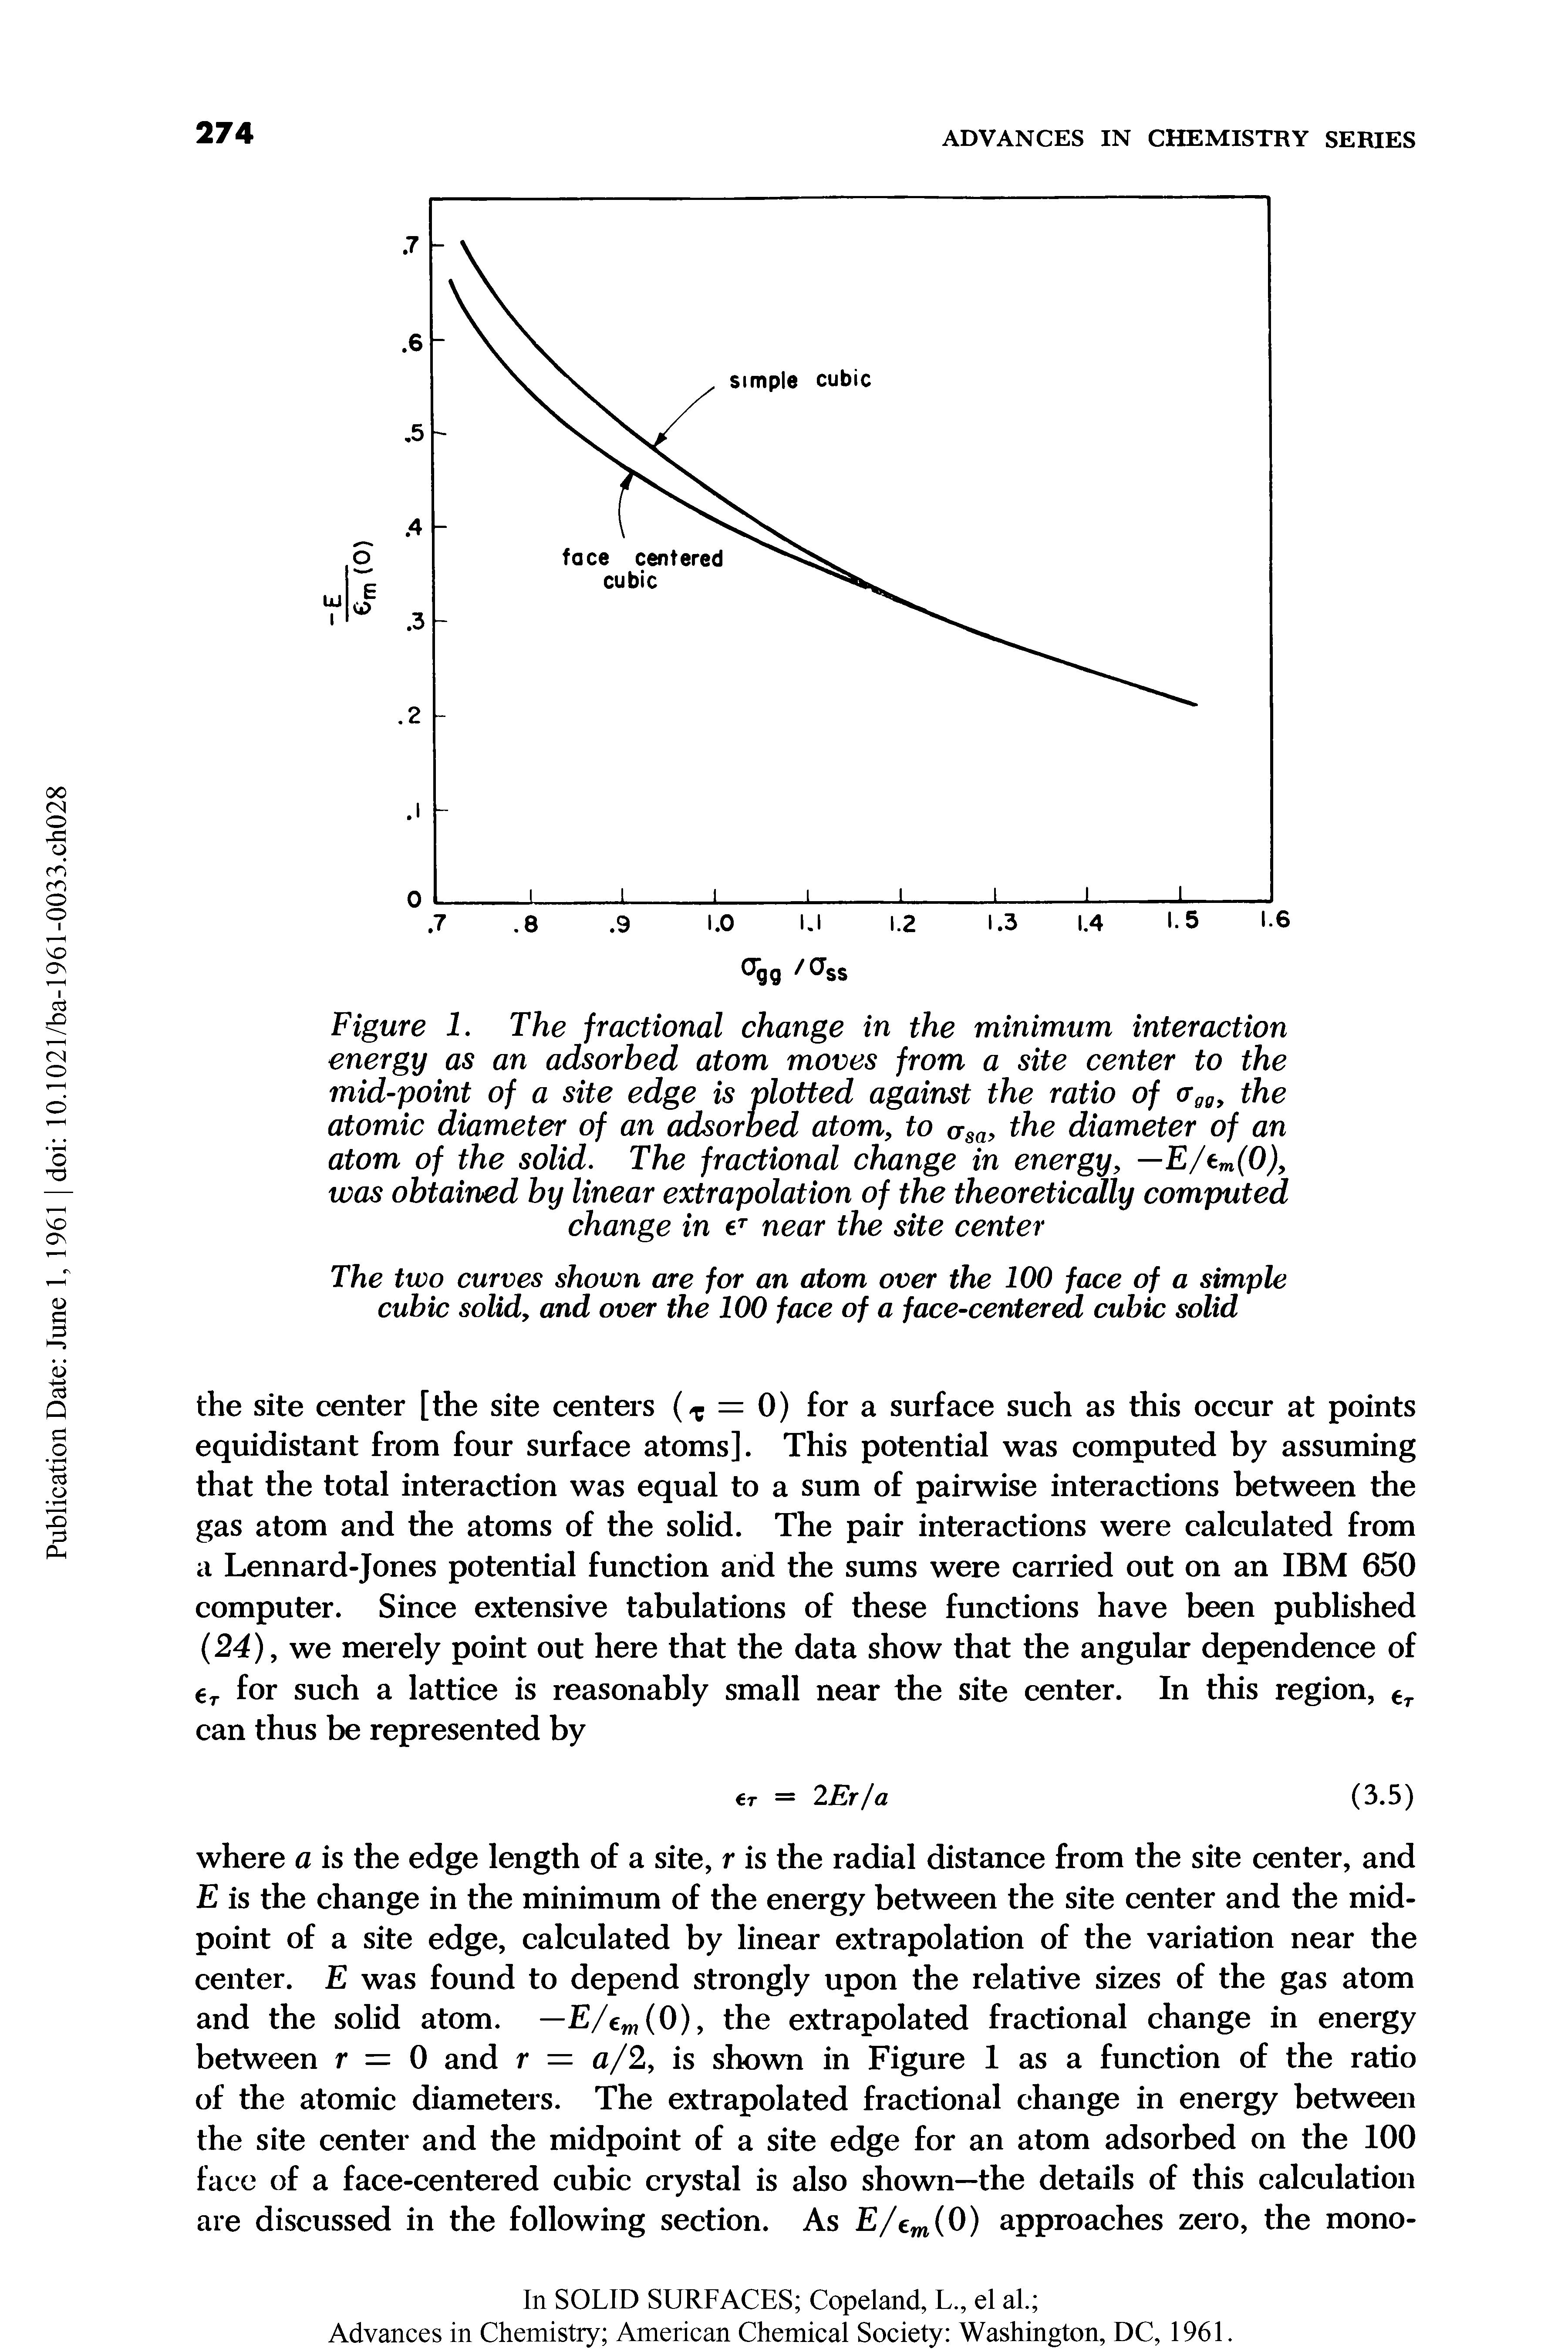 Figure 1. The fractional change in the minimum interaction energy as an adsorbed atom moves from a site center to the mid-point of a site edge is plotted against the ratio of crgg, the atomic diameter of an adsorbed atom, to (rsa, the diameter of an atom of the solid. The fractional change in energy, —E/em(0), was obtained by linear extrapolation of the theoretically computed change in eT near the site center...